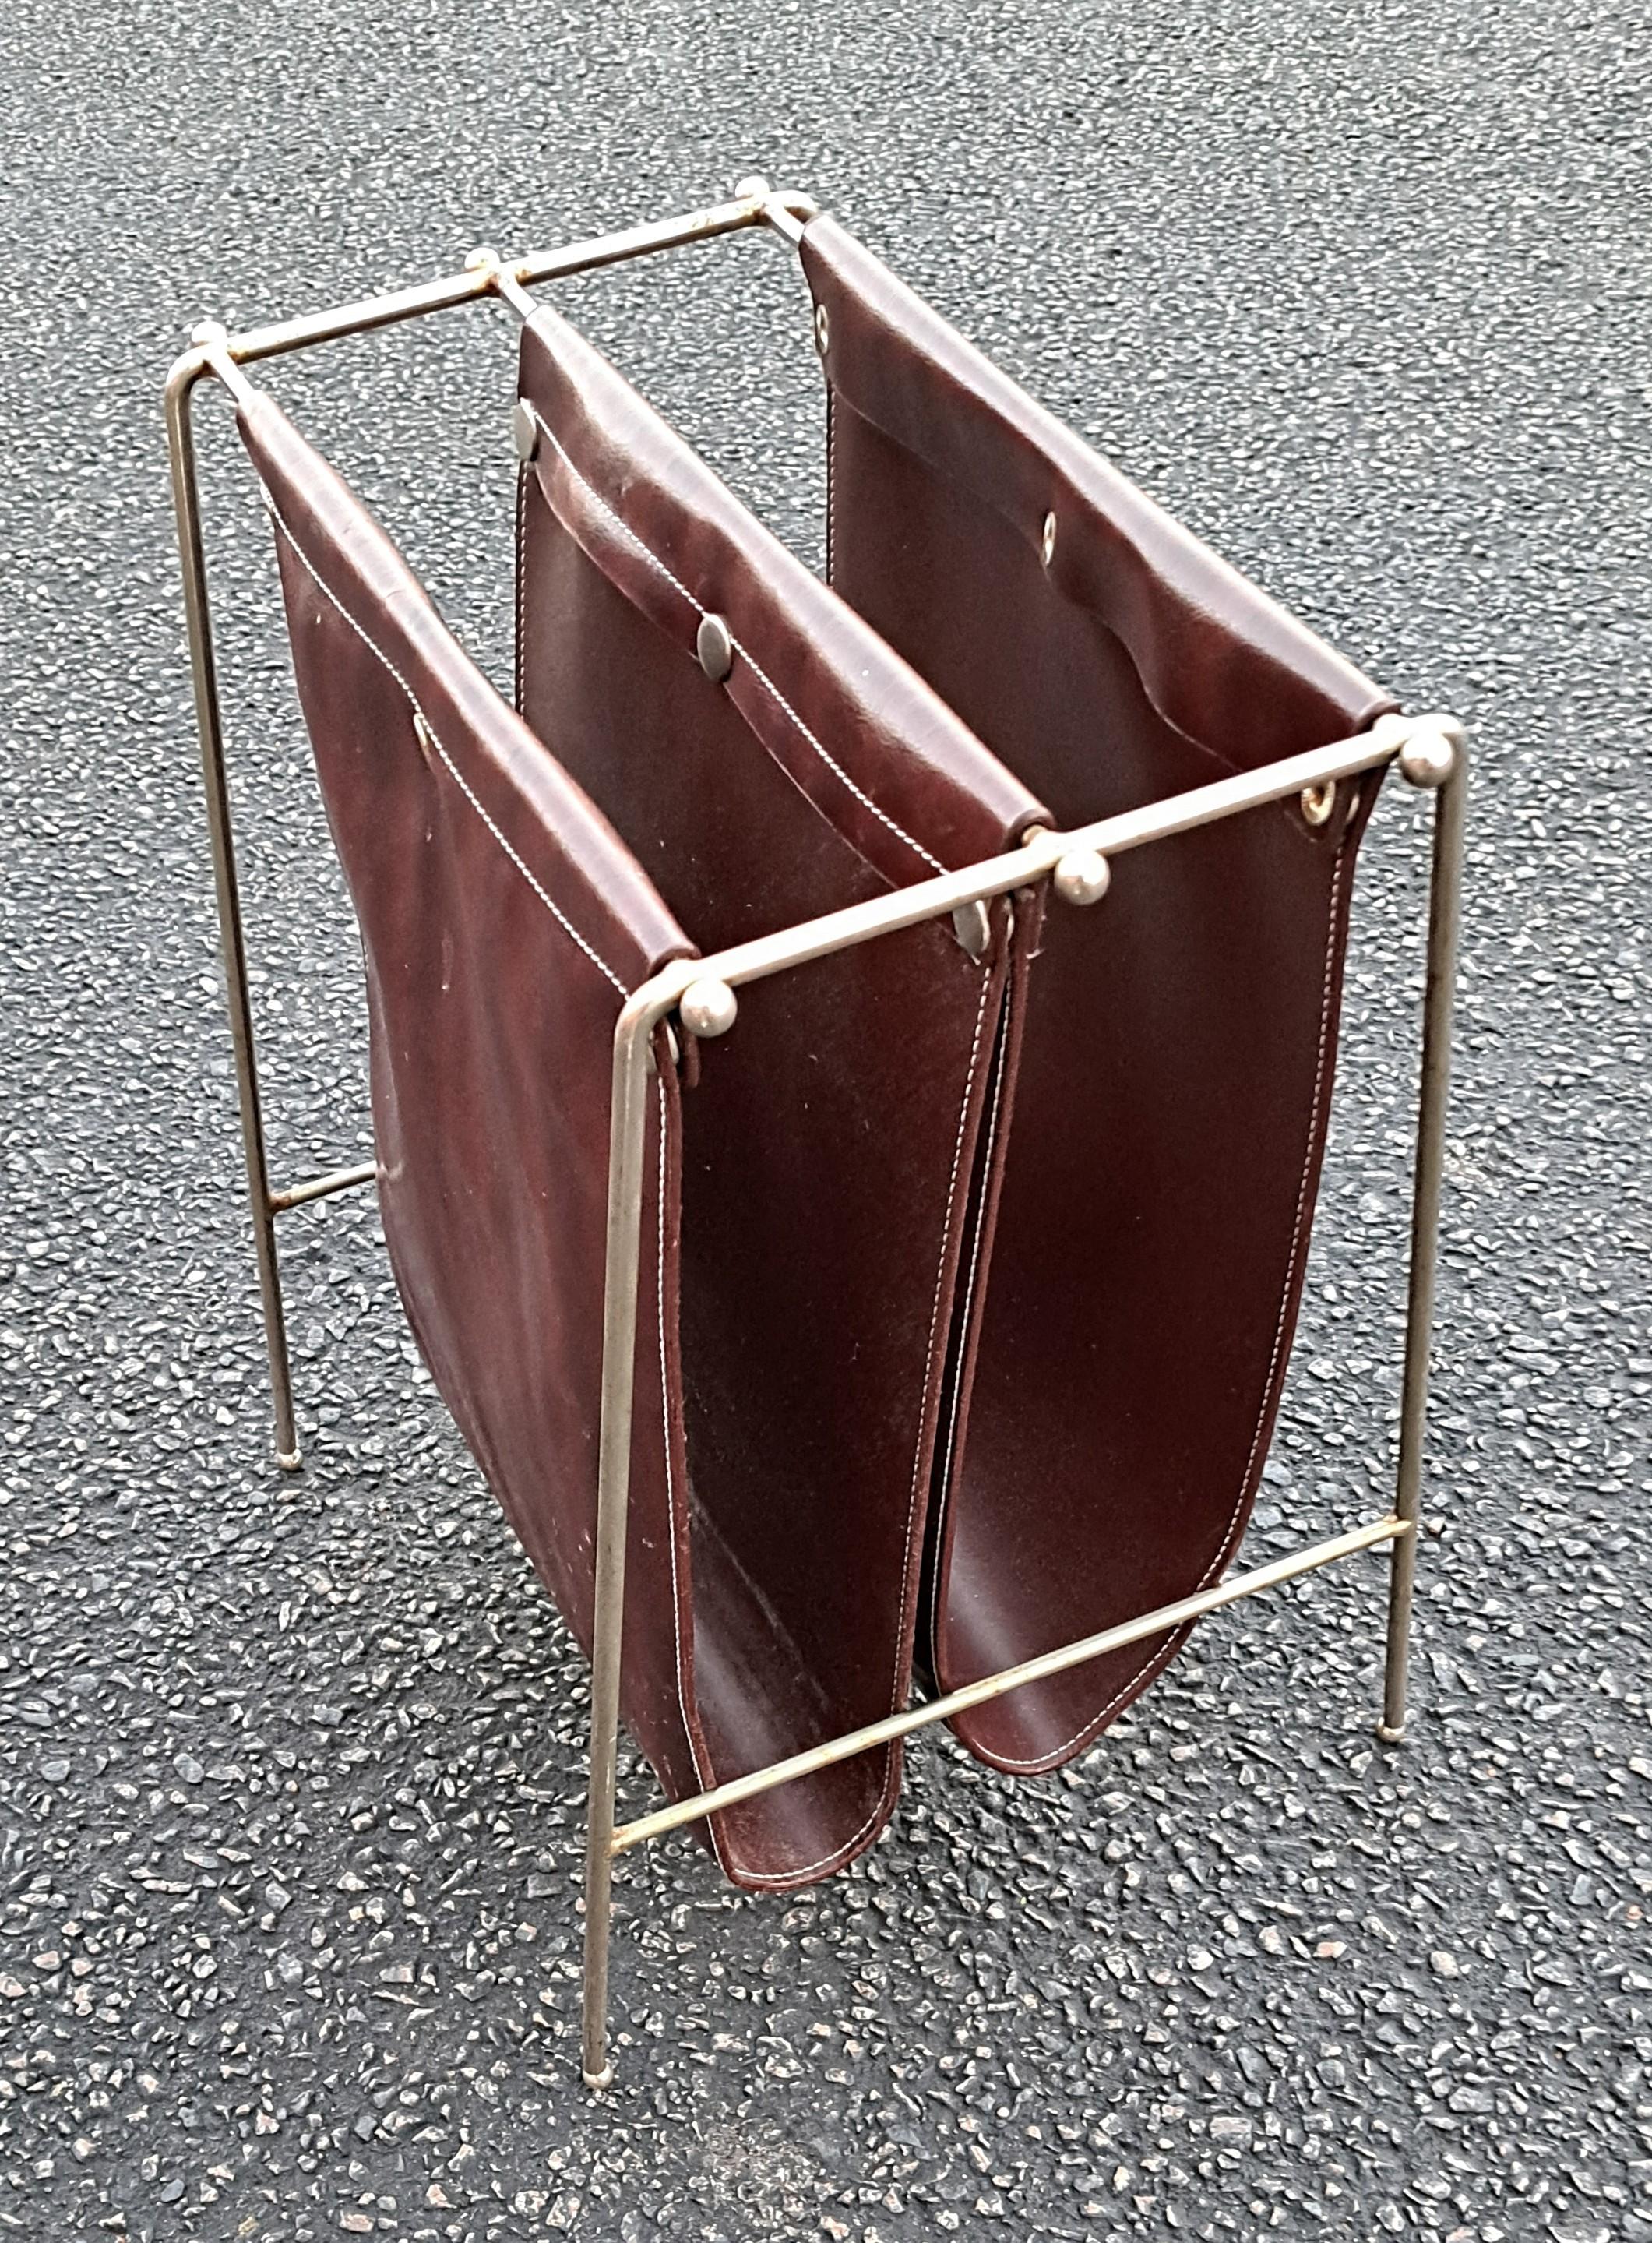 Classic mid-century modern Jacques Adnet attributed magazine rack. Stylishly made with faux leather and bent iron rods. This hard to find magazine rack exudes mid-century modern style. Can be used for magazines or LPs.